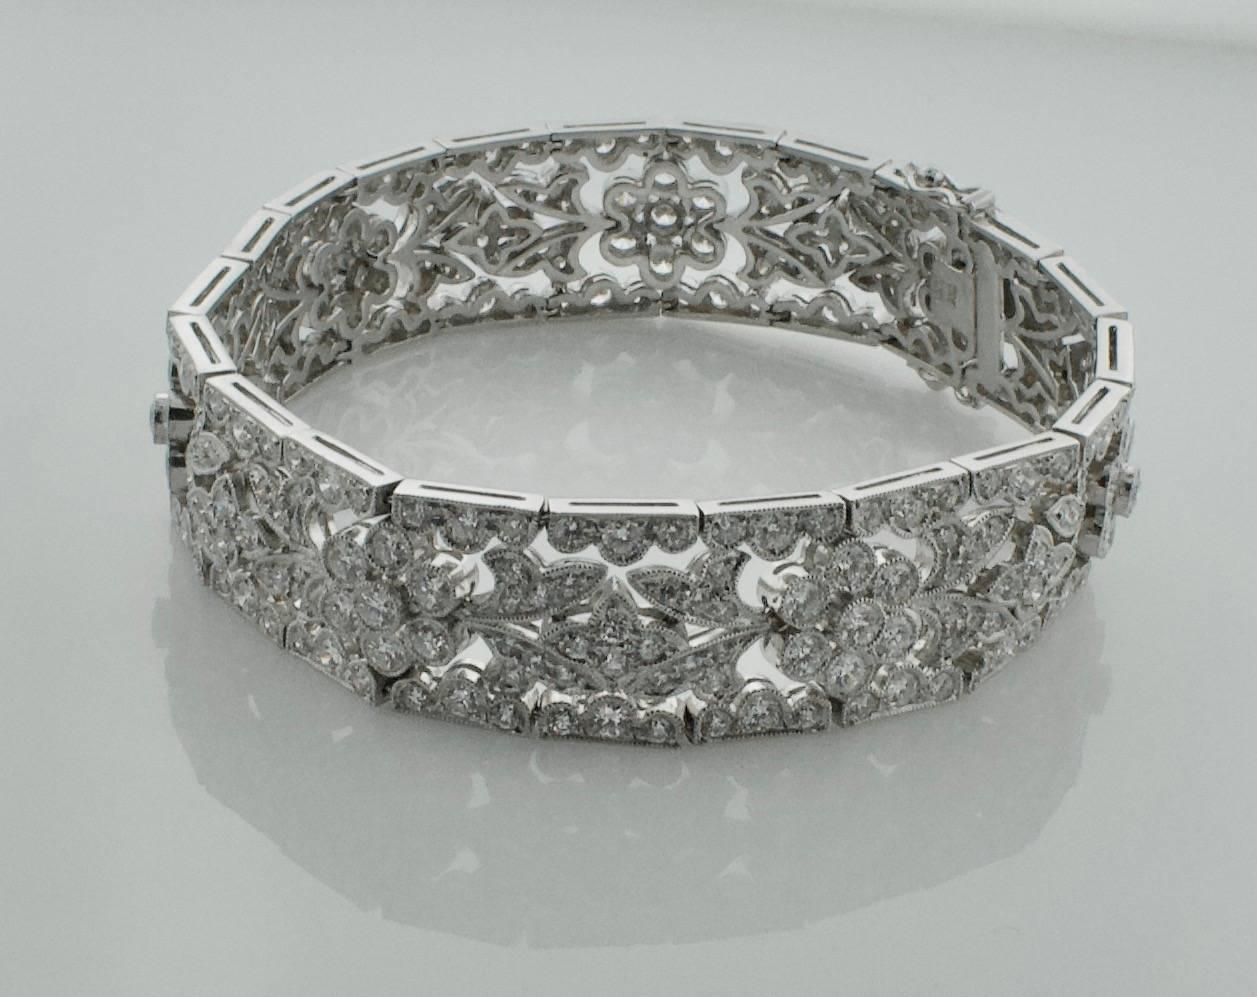 18 Karat White Gold Diamond Bracelet with 10 Carat of Diamonds In Excellent Condition For Sale In Wailea, HI